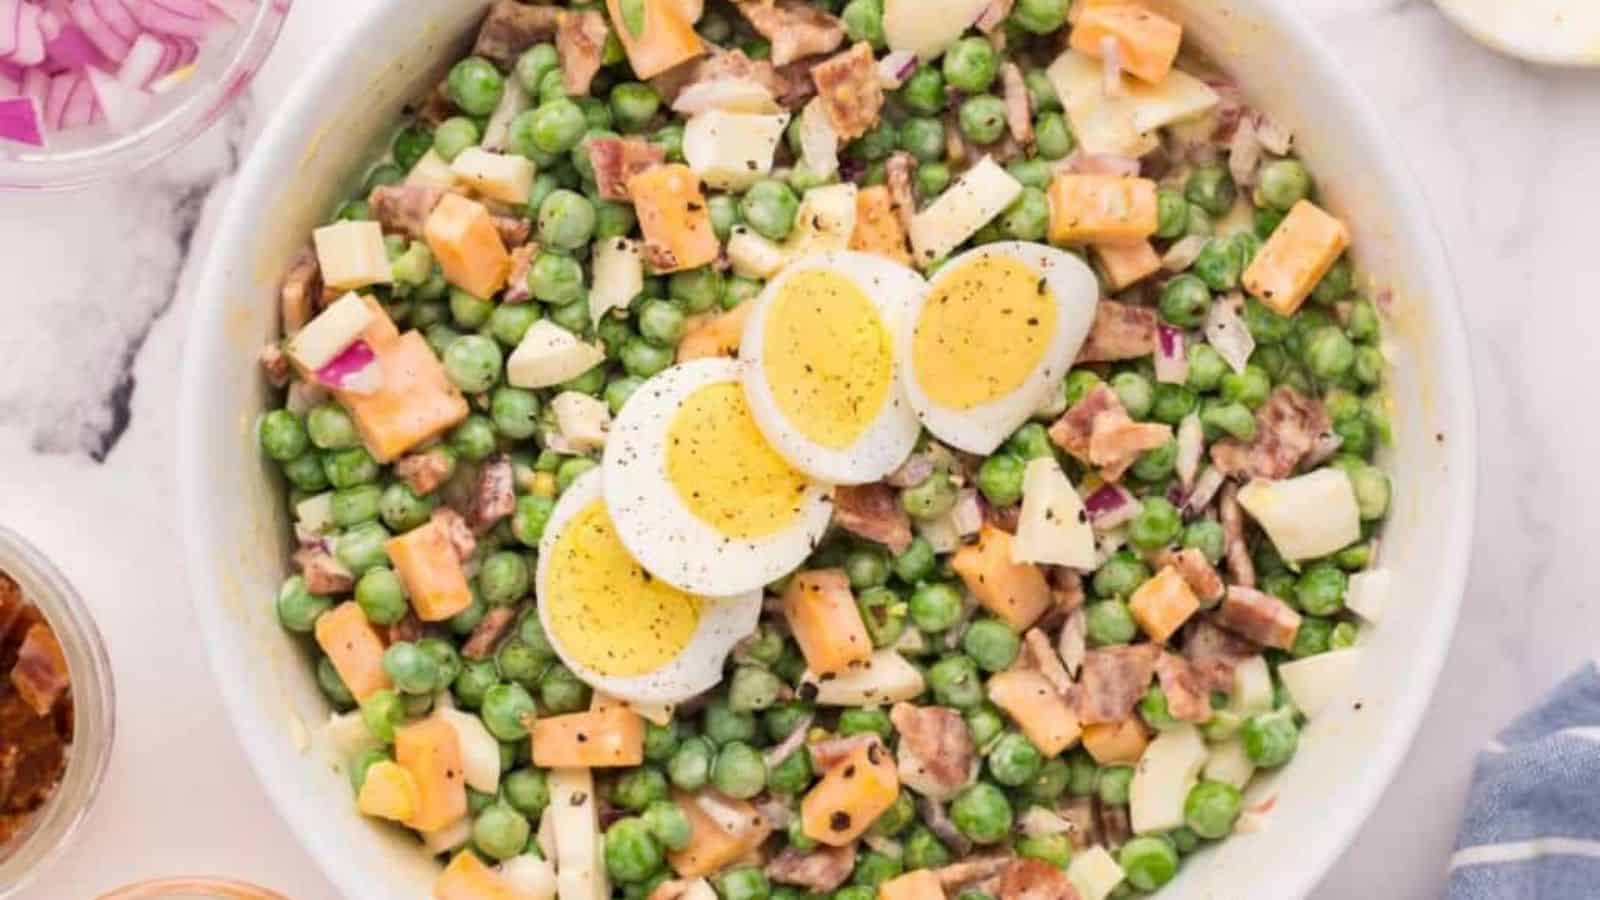 Close-up image of pea salad with eggs on a bowl.